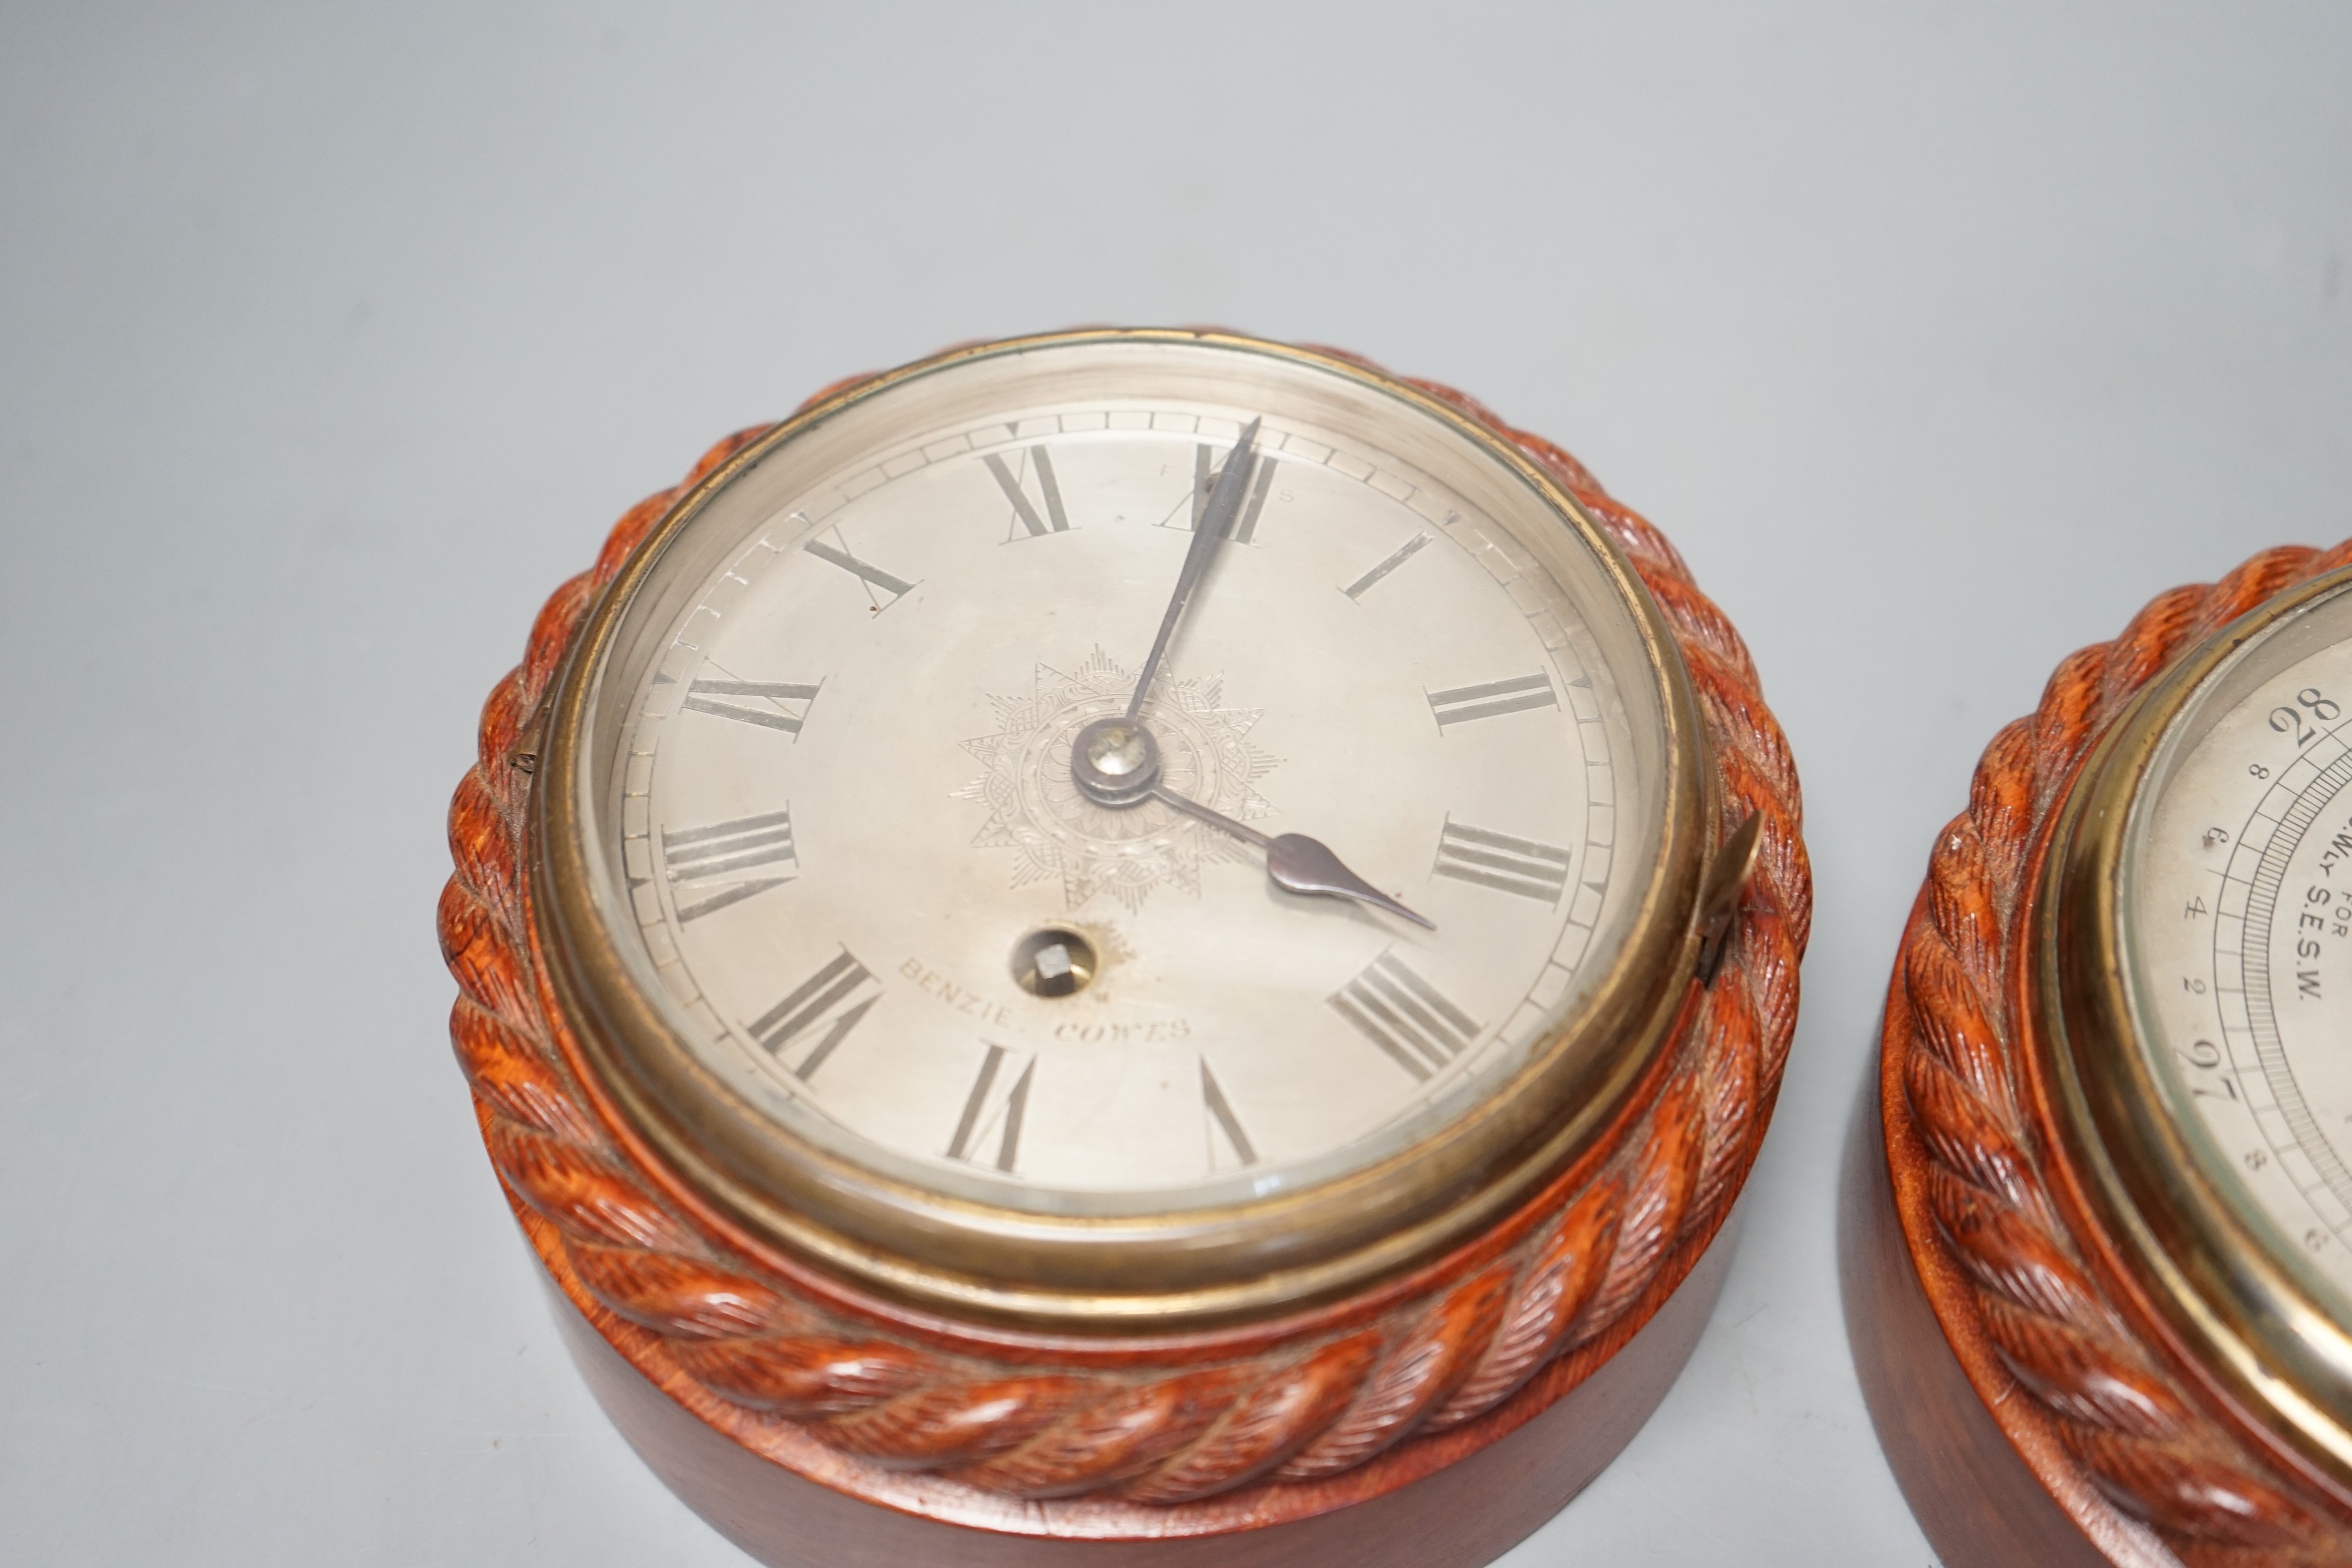 A Victorian teak cased bulkhead timepiece by Benzie, Cowes, Isle of Wight with matching aneroid barometer, both with carved rope twist cases, 15cm. diam.